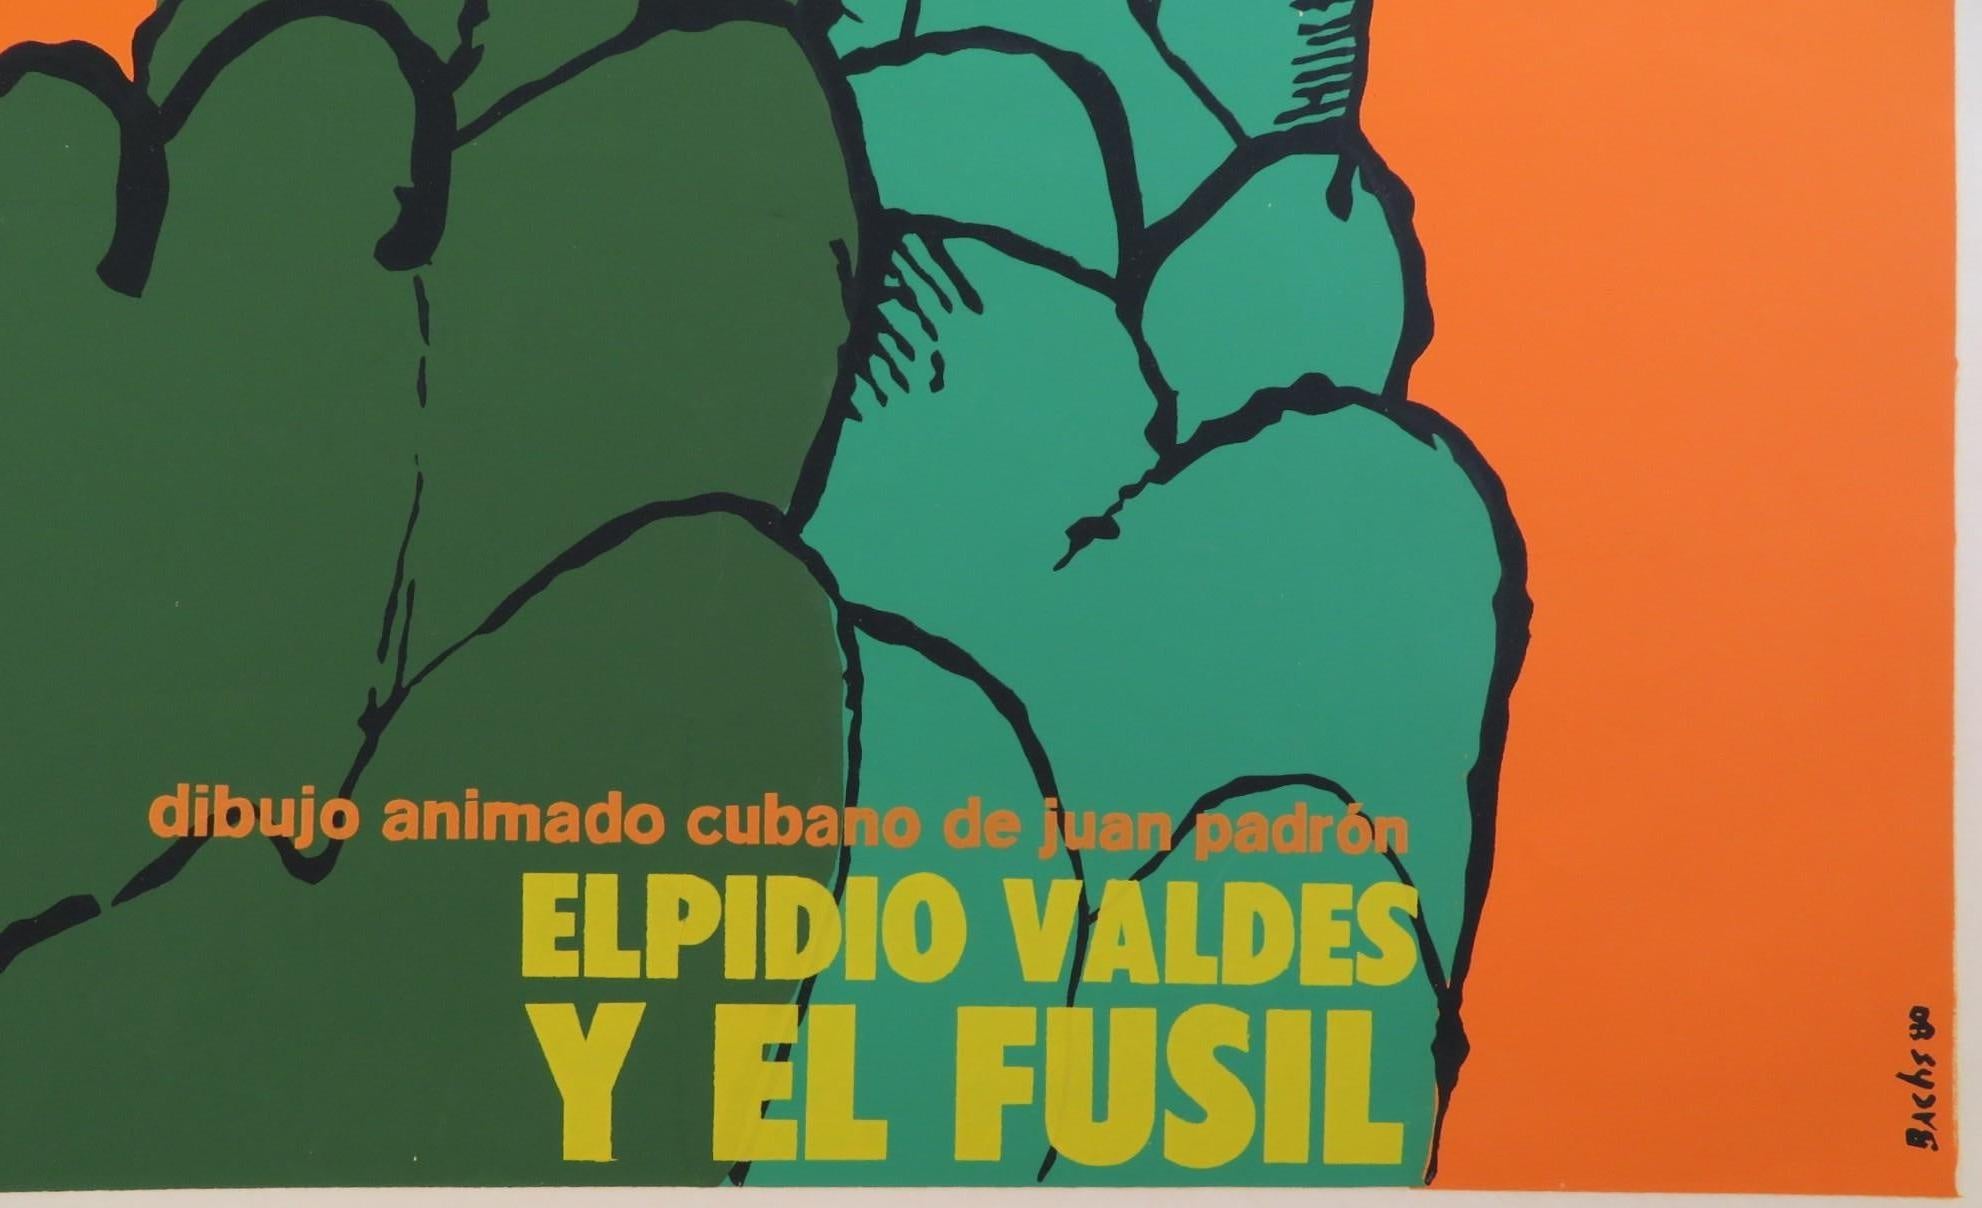 Modern Cuban Animated Film Poster Juan Padron –Elpidio Valdes y el Fusil– by Bachs 1980 For Sale